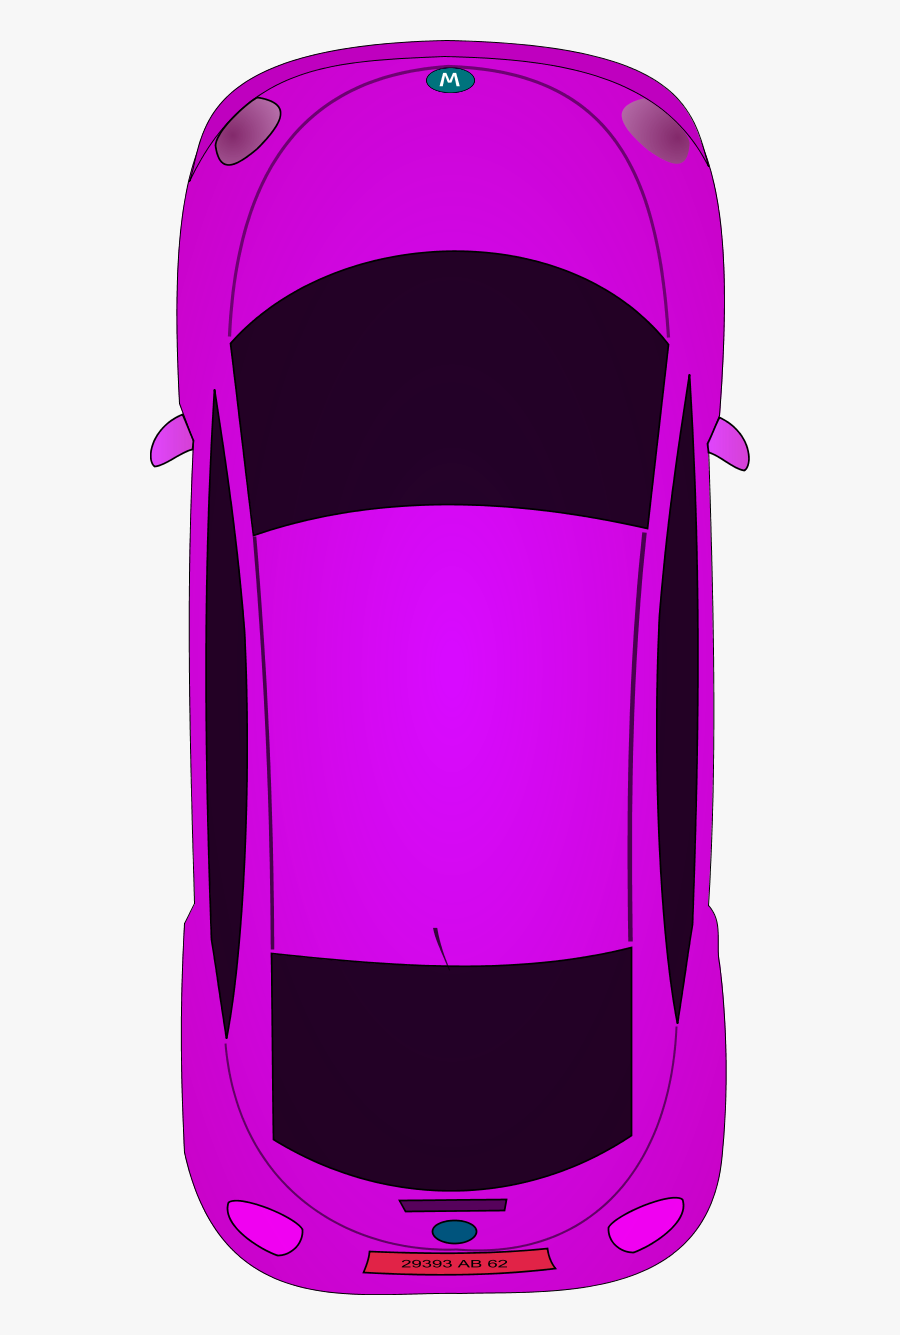 Image Of Car Clipart Top View - Cartoon Cars Birds Eye View, Transparent Clipart